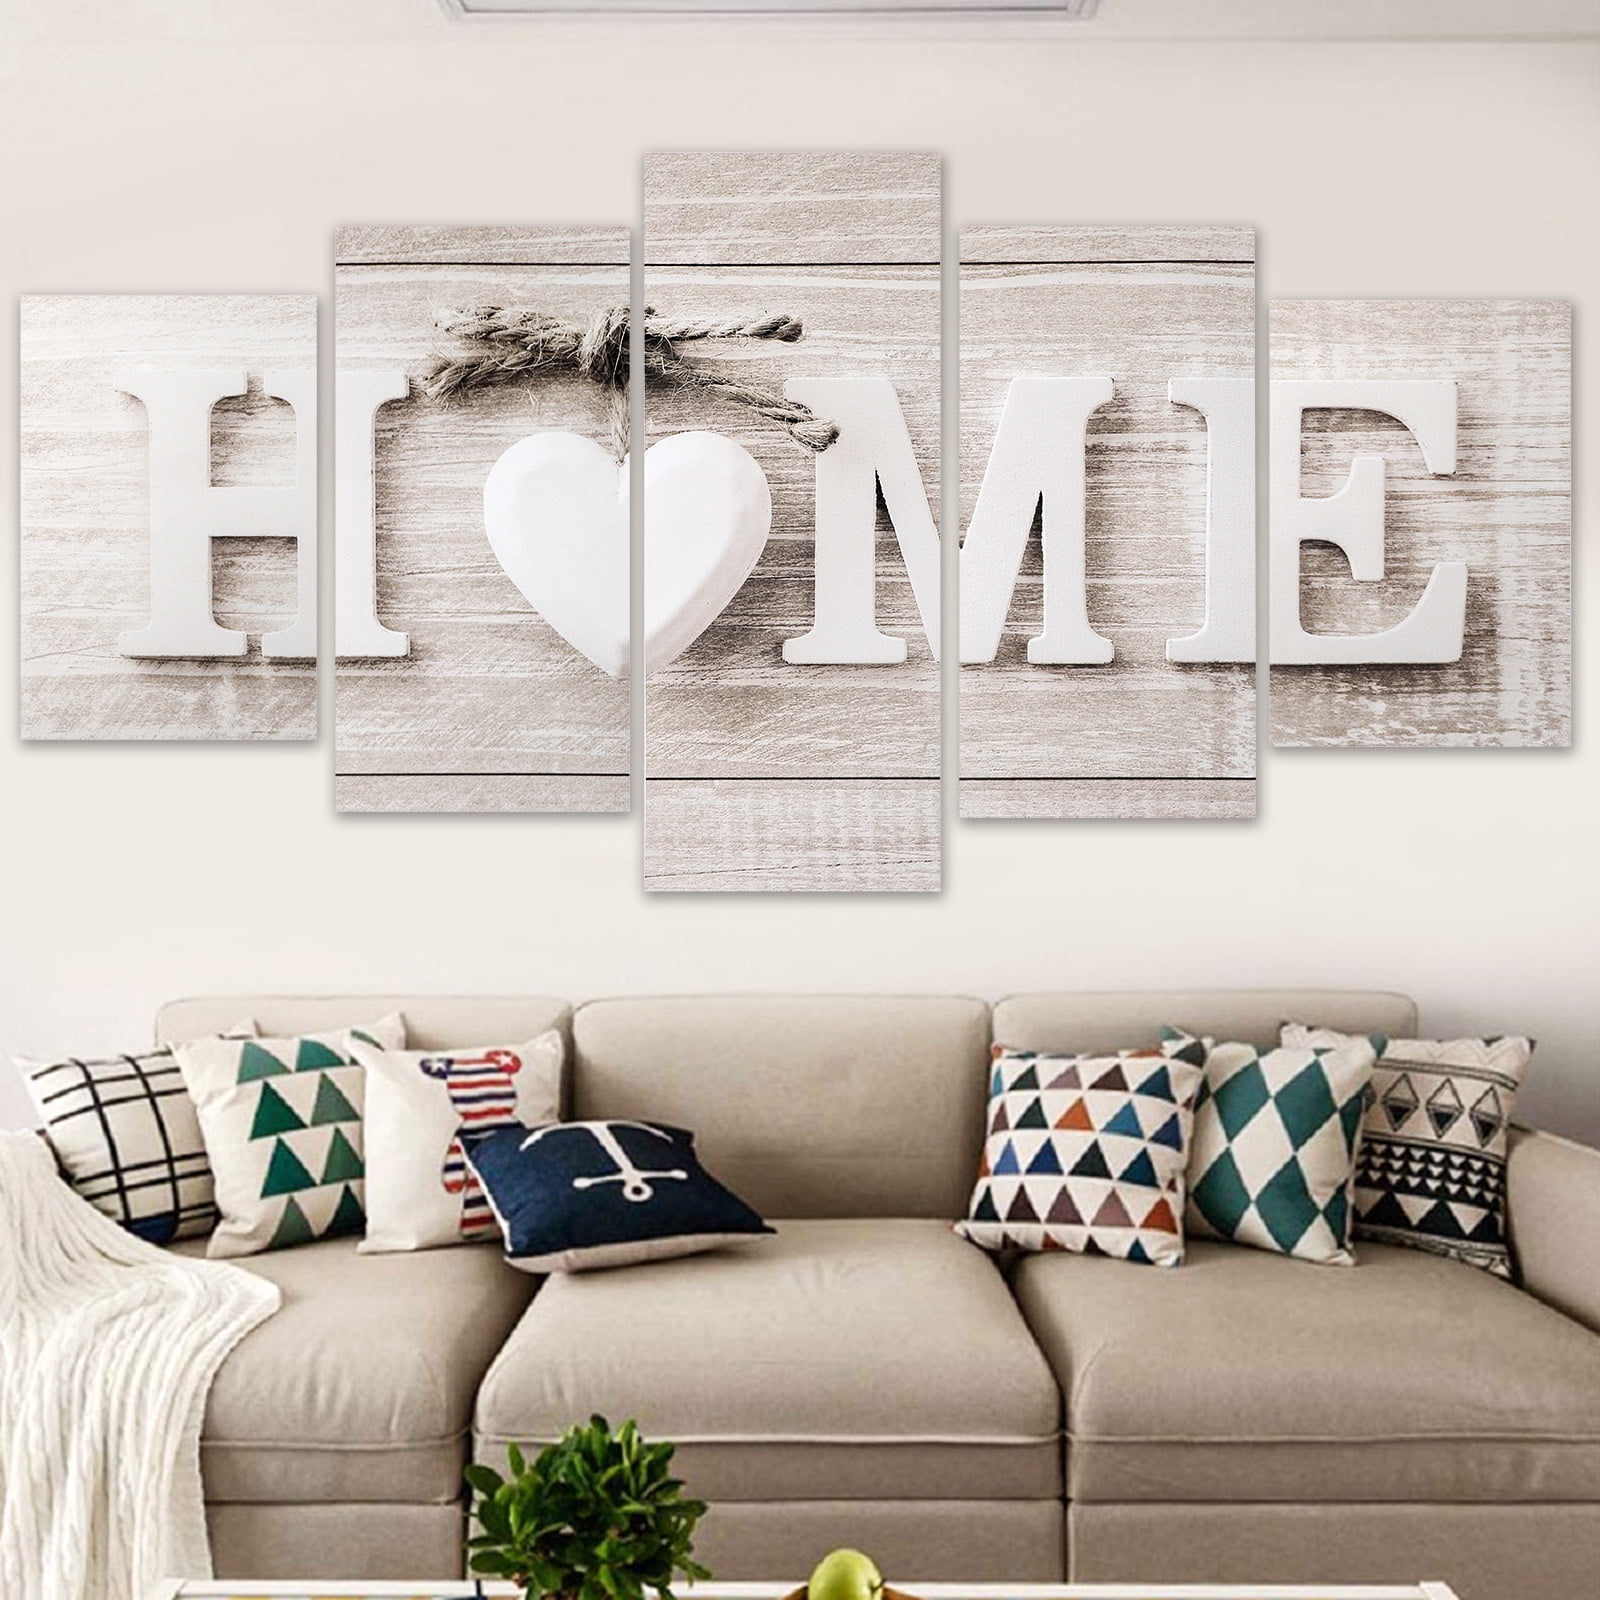 Metal Modern Wall Decor Gift Party Spa Home Office Sculpture Living Room Cafe 